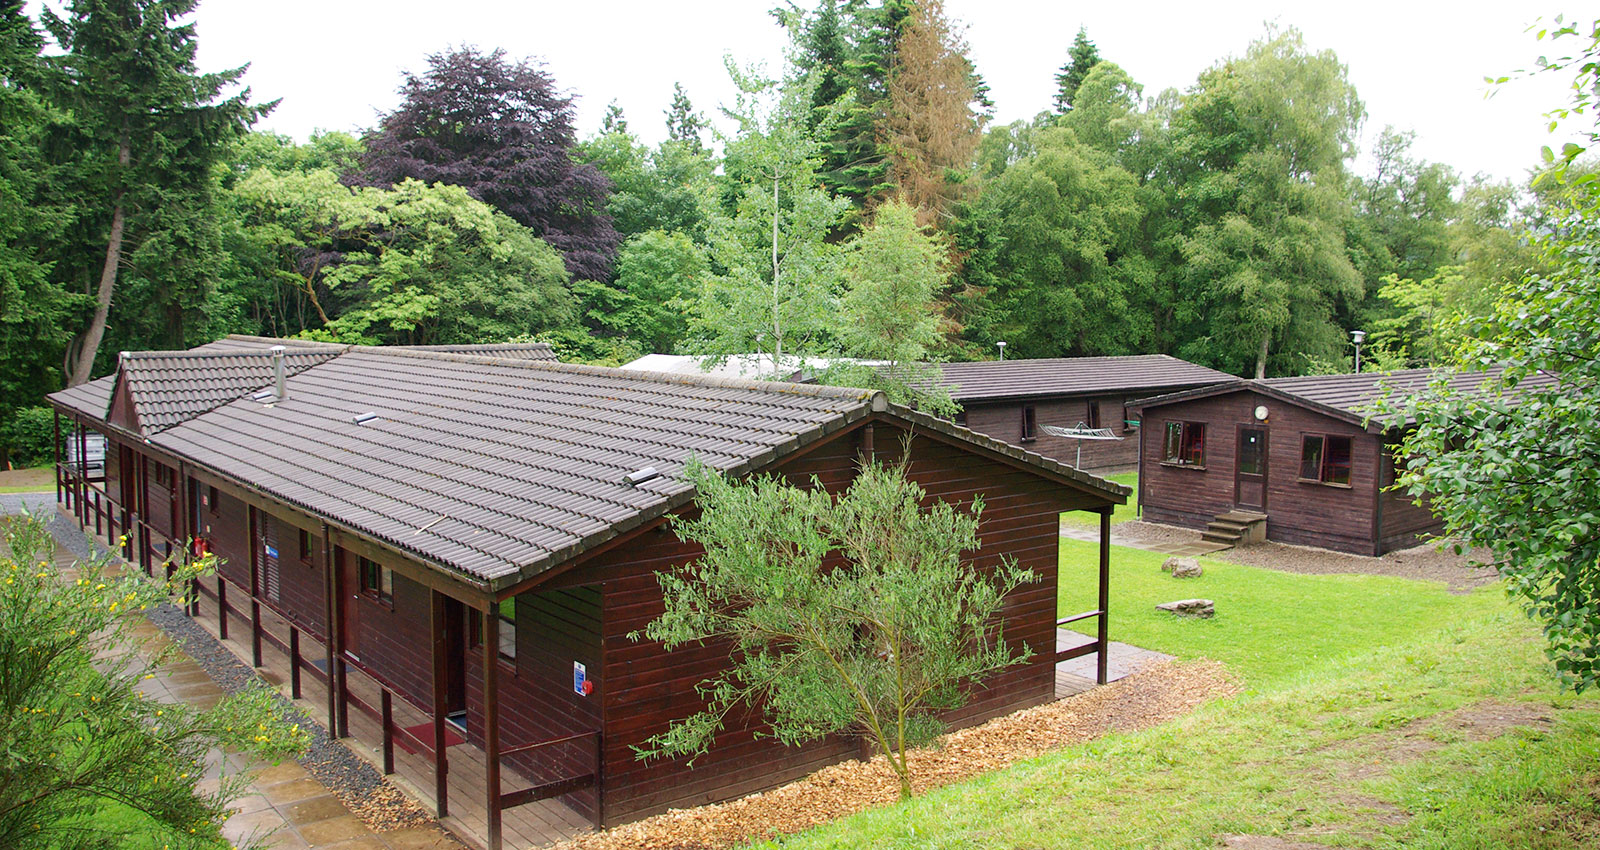 Youth Group Residential Centres